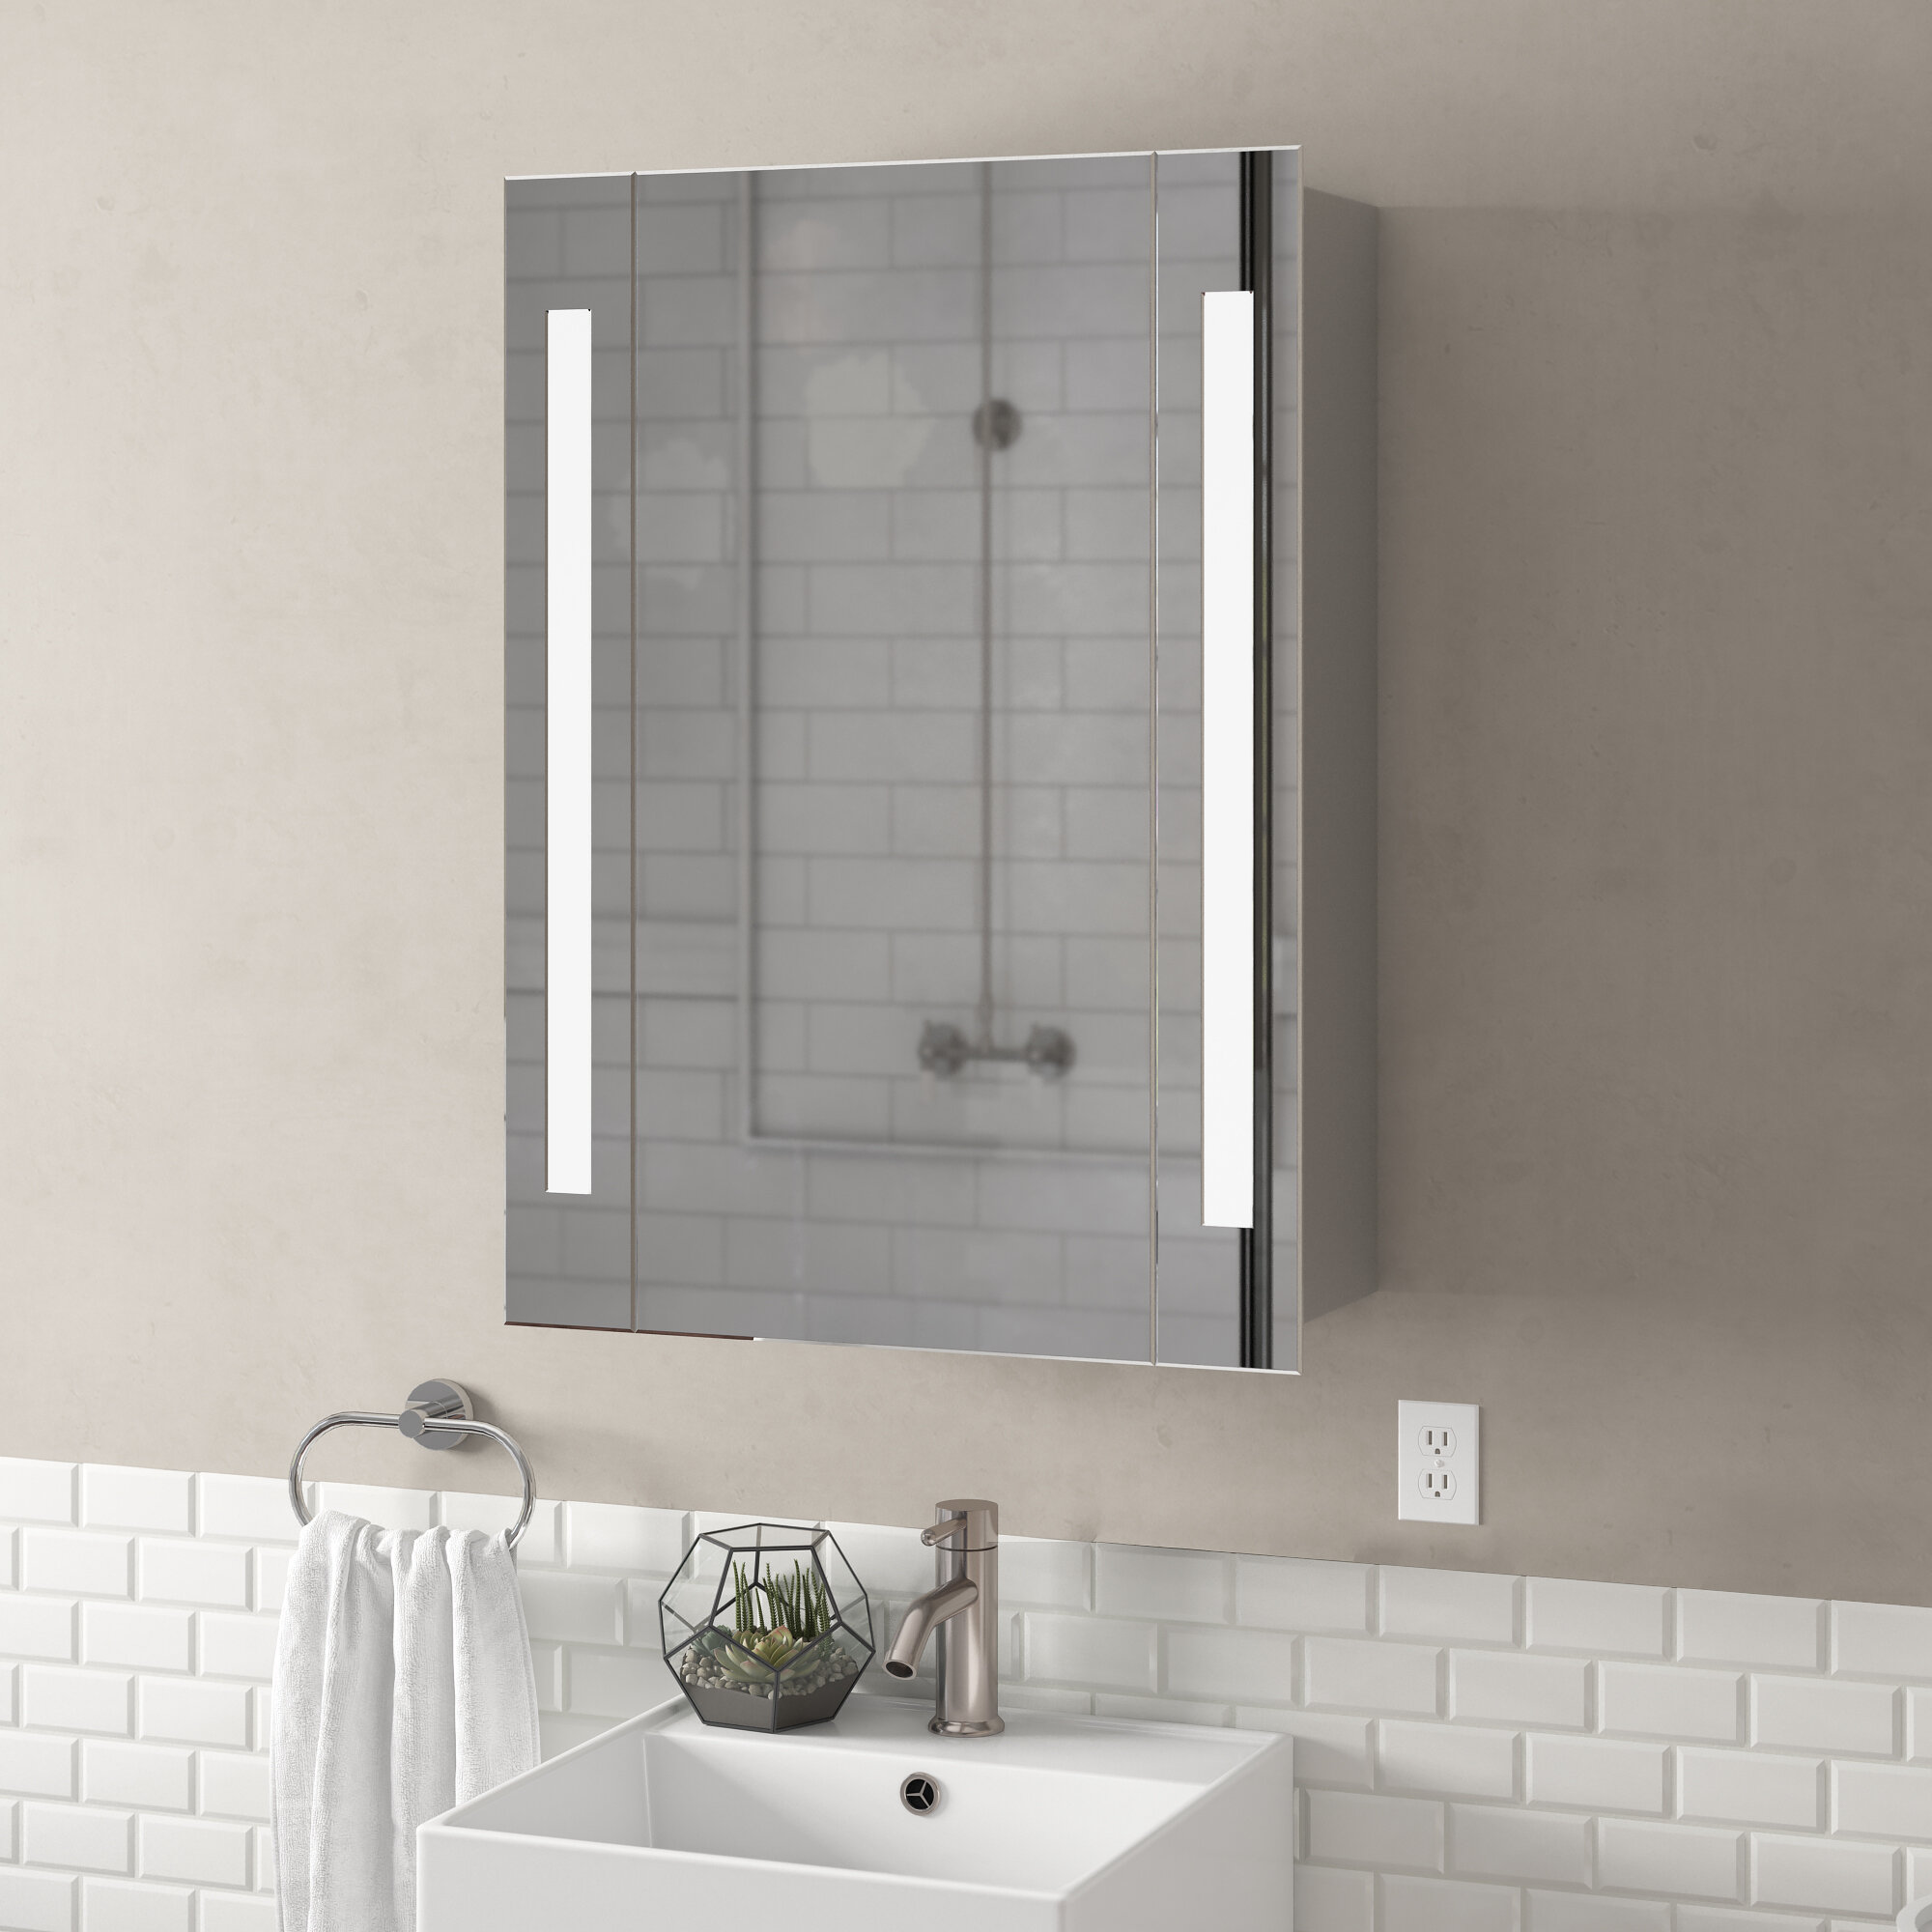 Featured image of post Canalles Led Mirrored Bathroom Medicine Cabinet / Shop for lighted medicine cabinet at walmart.com.